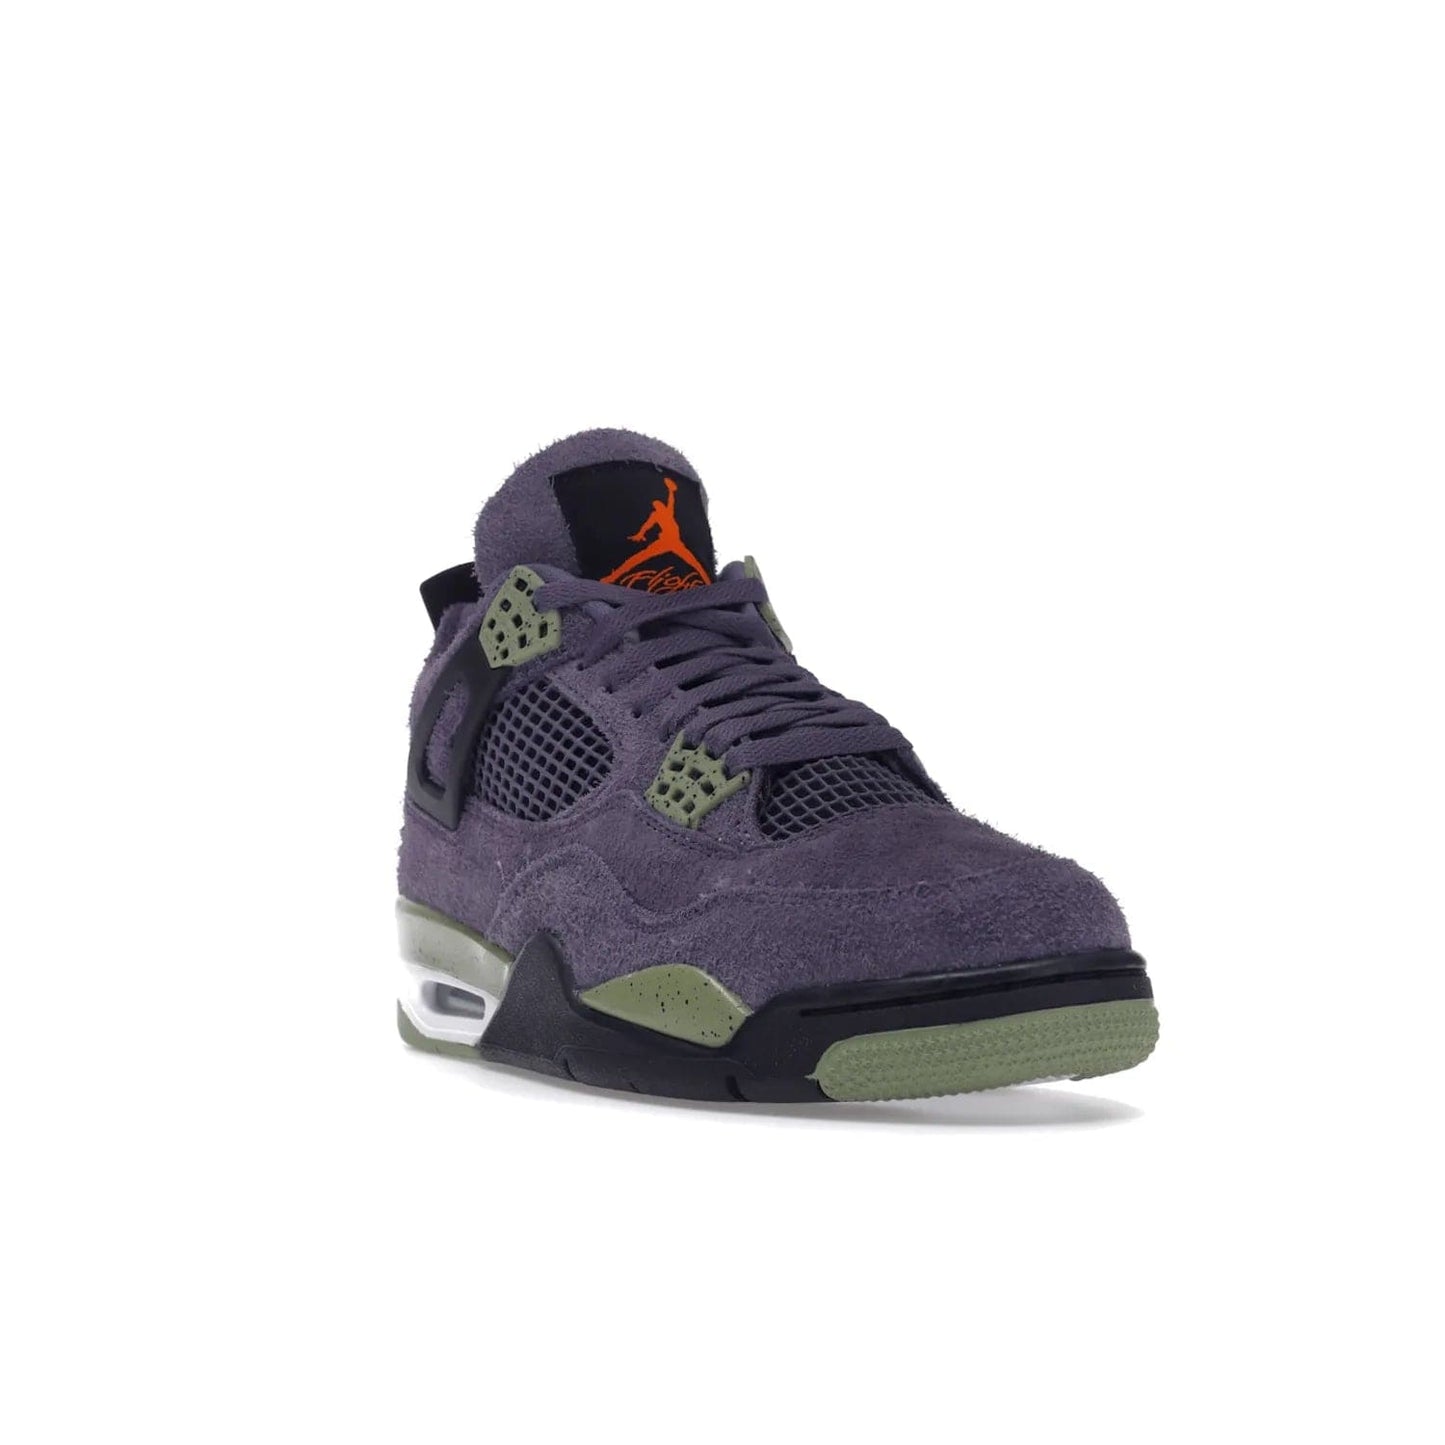 Jordan 4 Retro Canyon Purple (Women's) - Image 7 - Only at www.BallersClubKickz.com - New Air Jordan 4 Retro Canyon Purple W sneaker features shaggy purple suede, lime highlights & safety orange Jumpman branding. Classic ankle-hugging silhouette with modern colors released 15/10/2022.